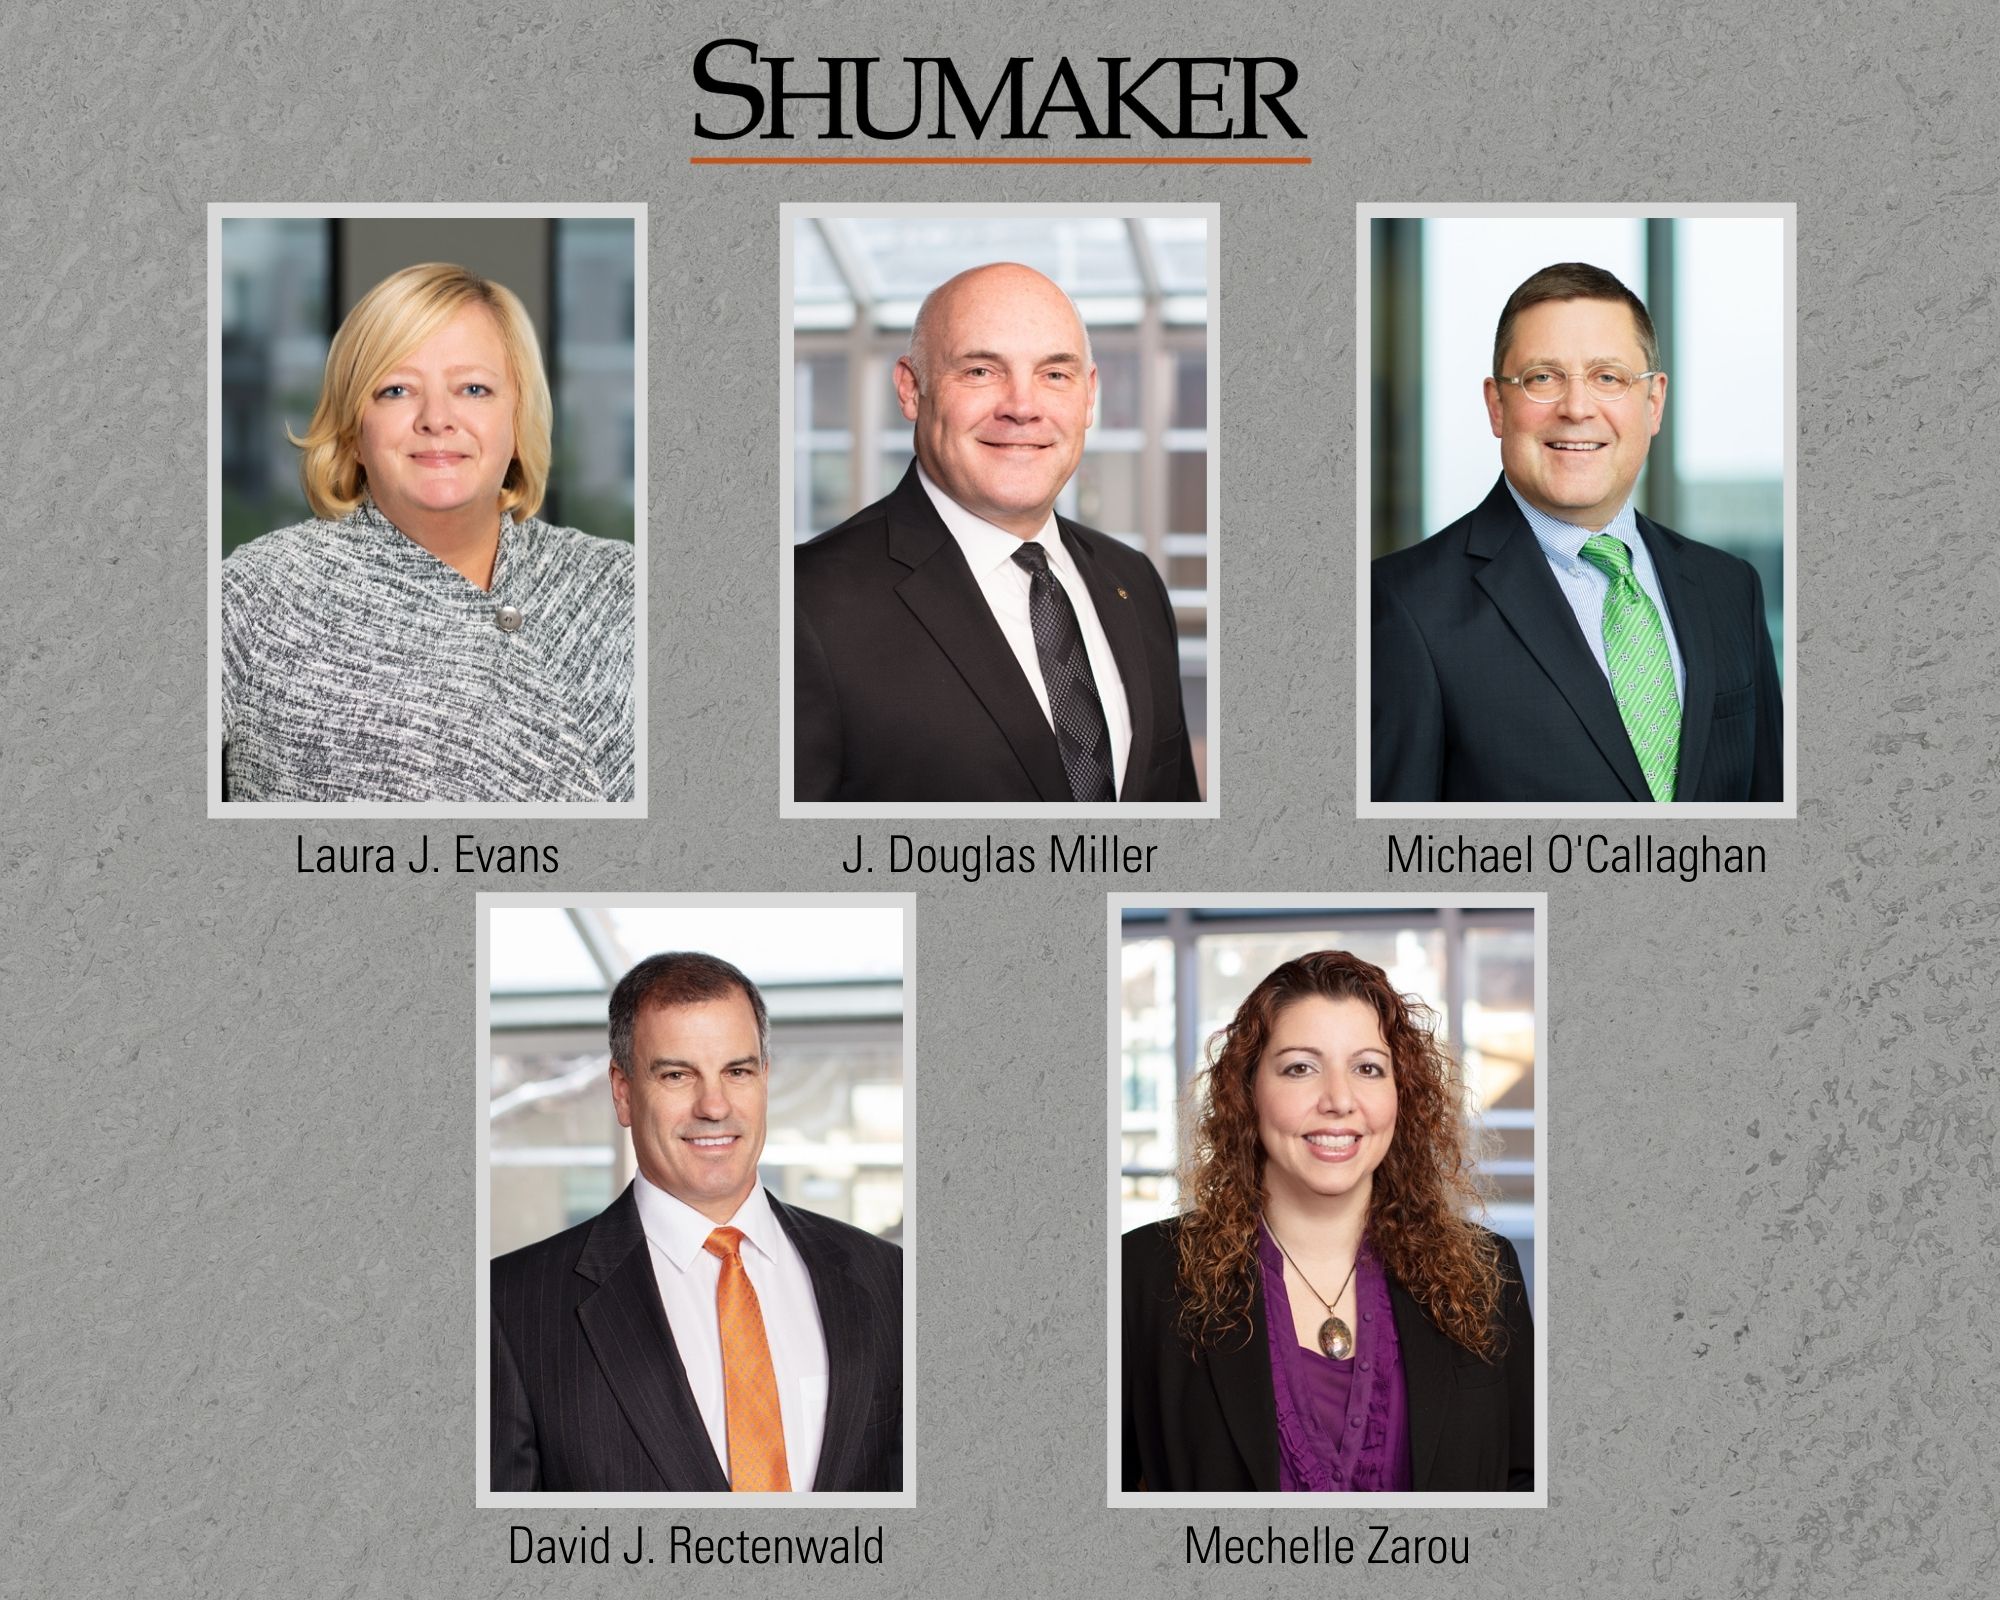 Shumaker Announces National Leaders to Reach Growing Demand for Legal Services